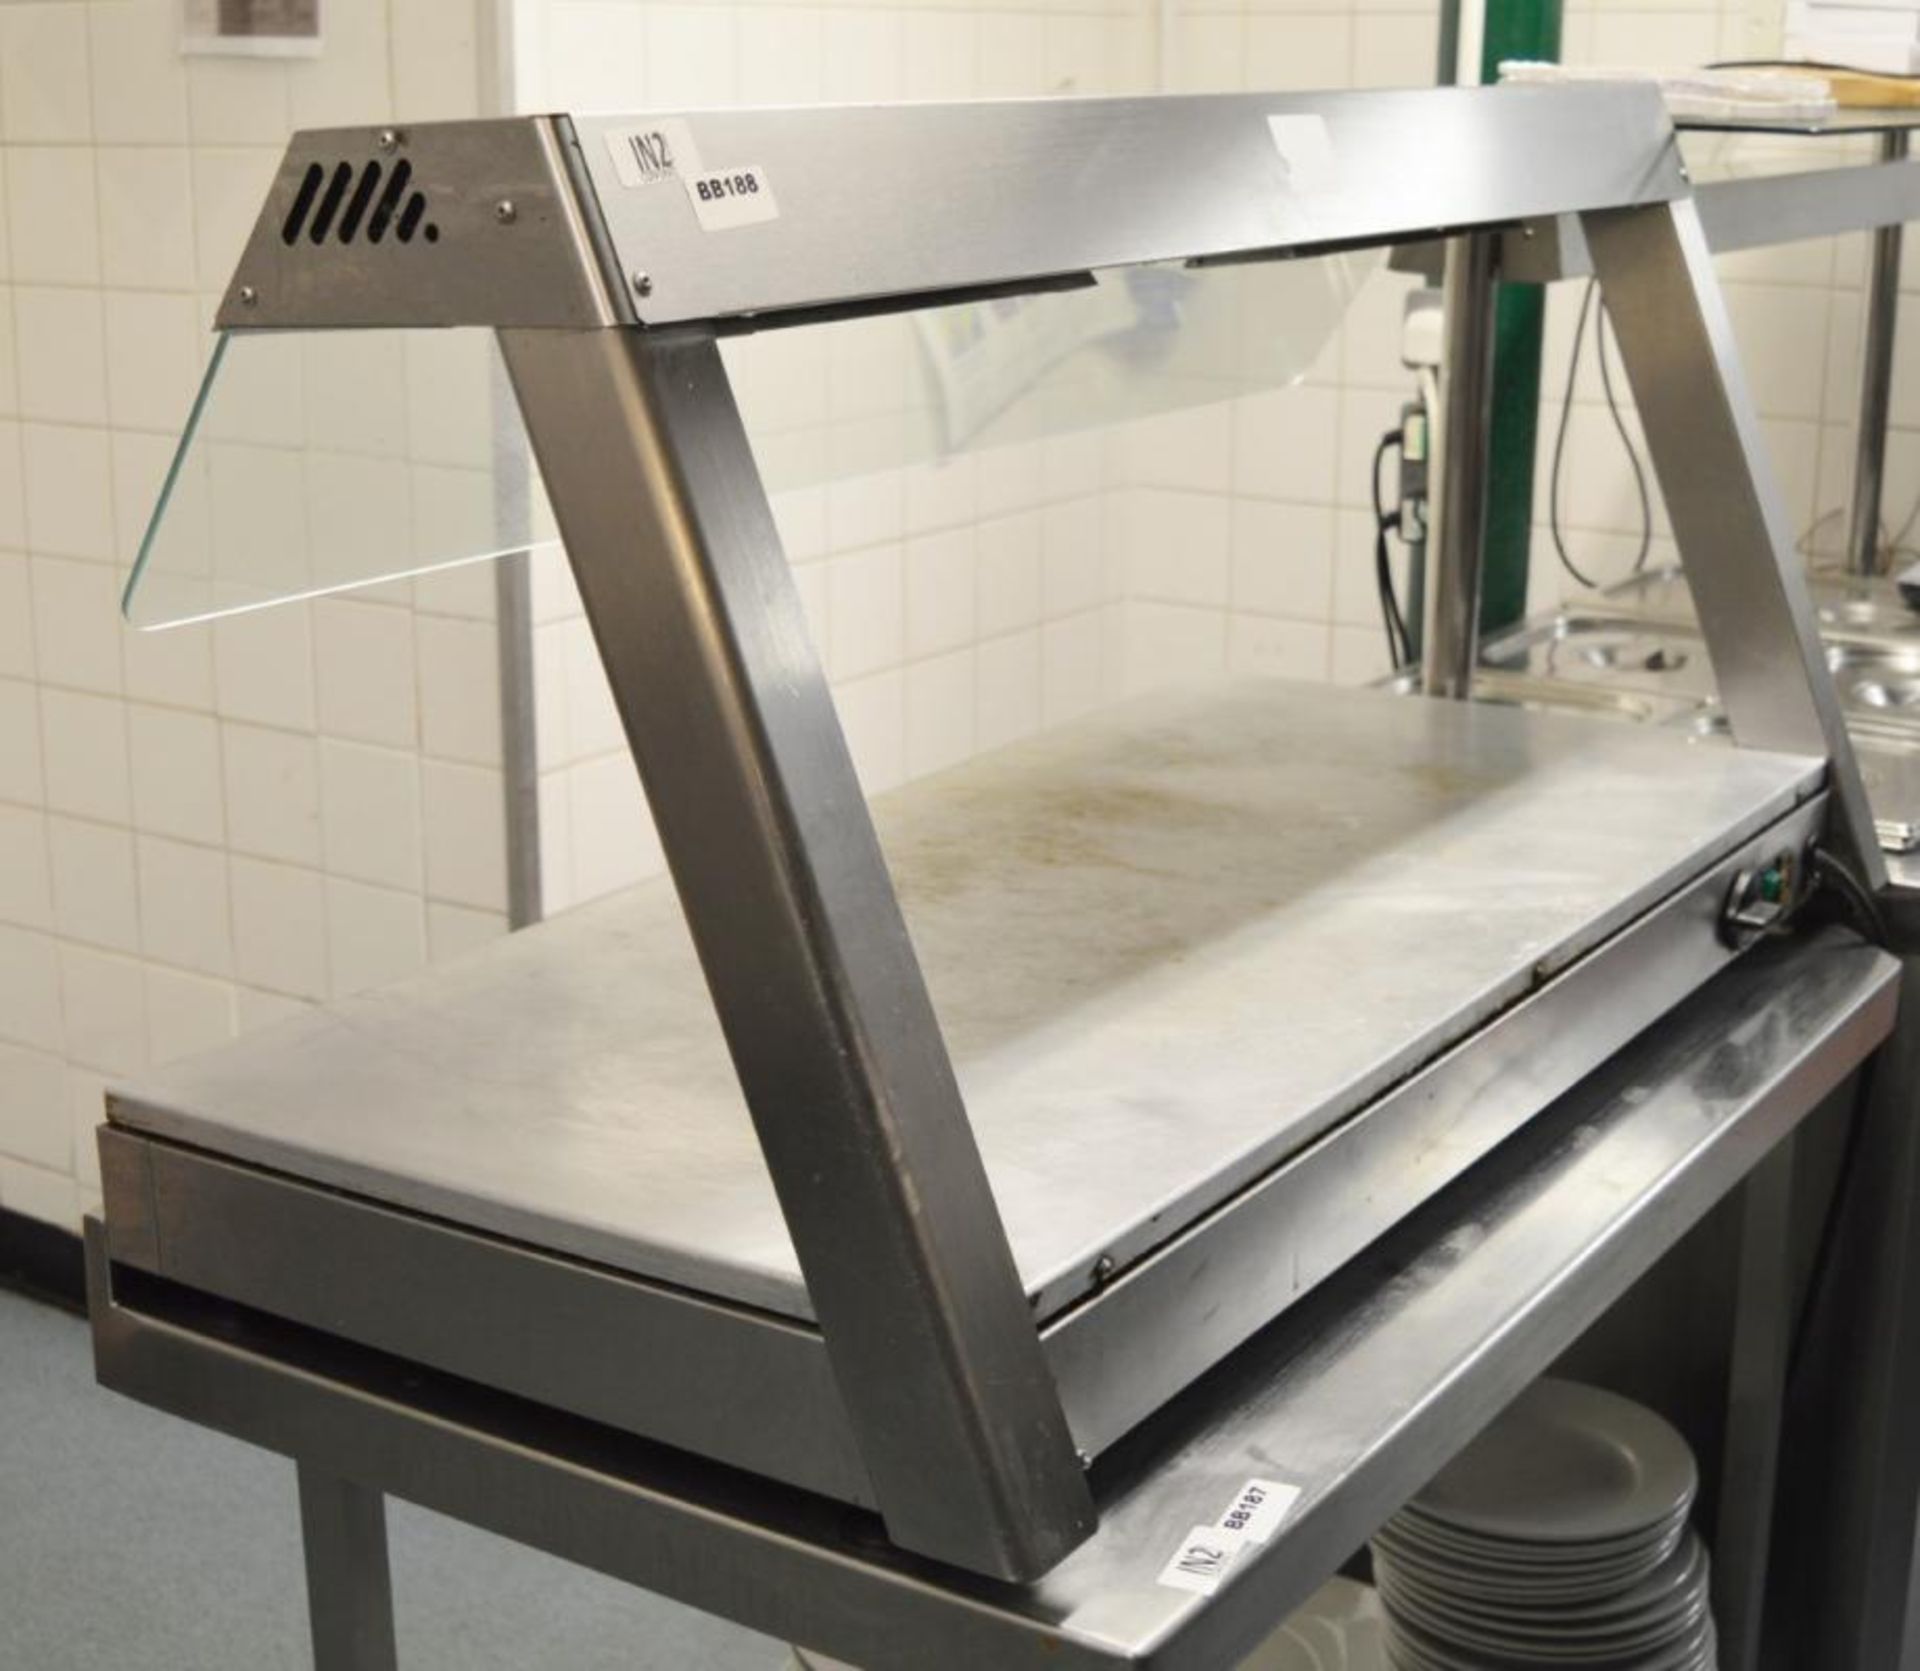 1 x Lincat Hot Plate Food Warmer - 240v - H56 x W113 x D55 cms - Ref BB188 TF - CL351 - Location - Image 3 of 3